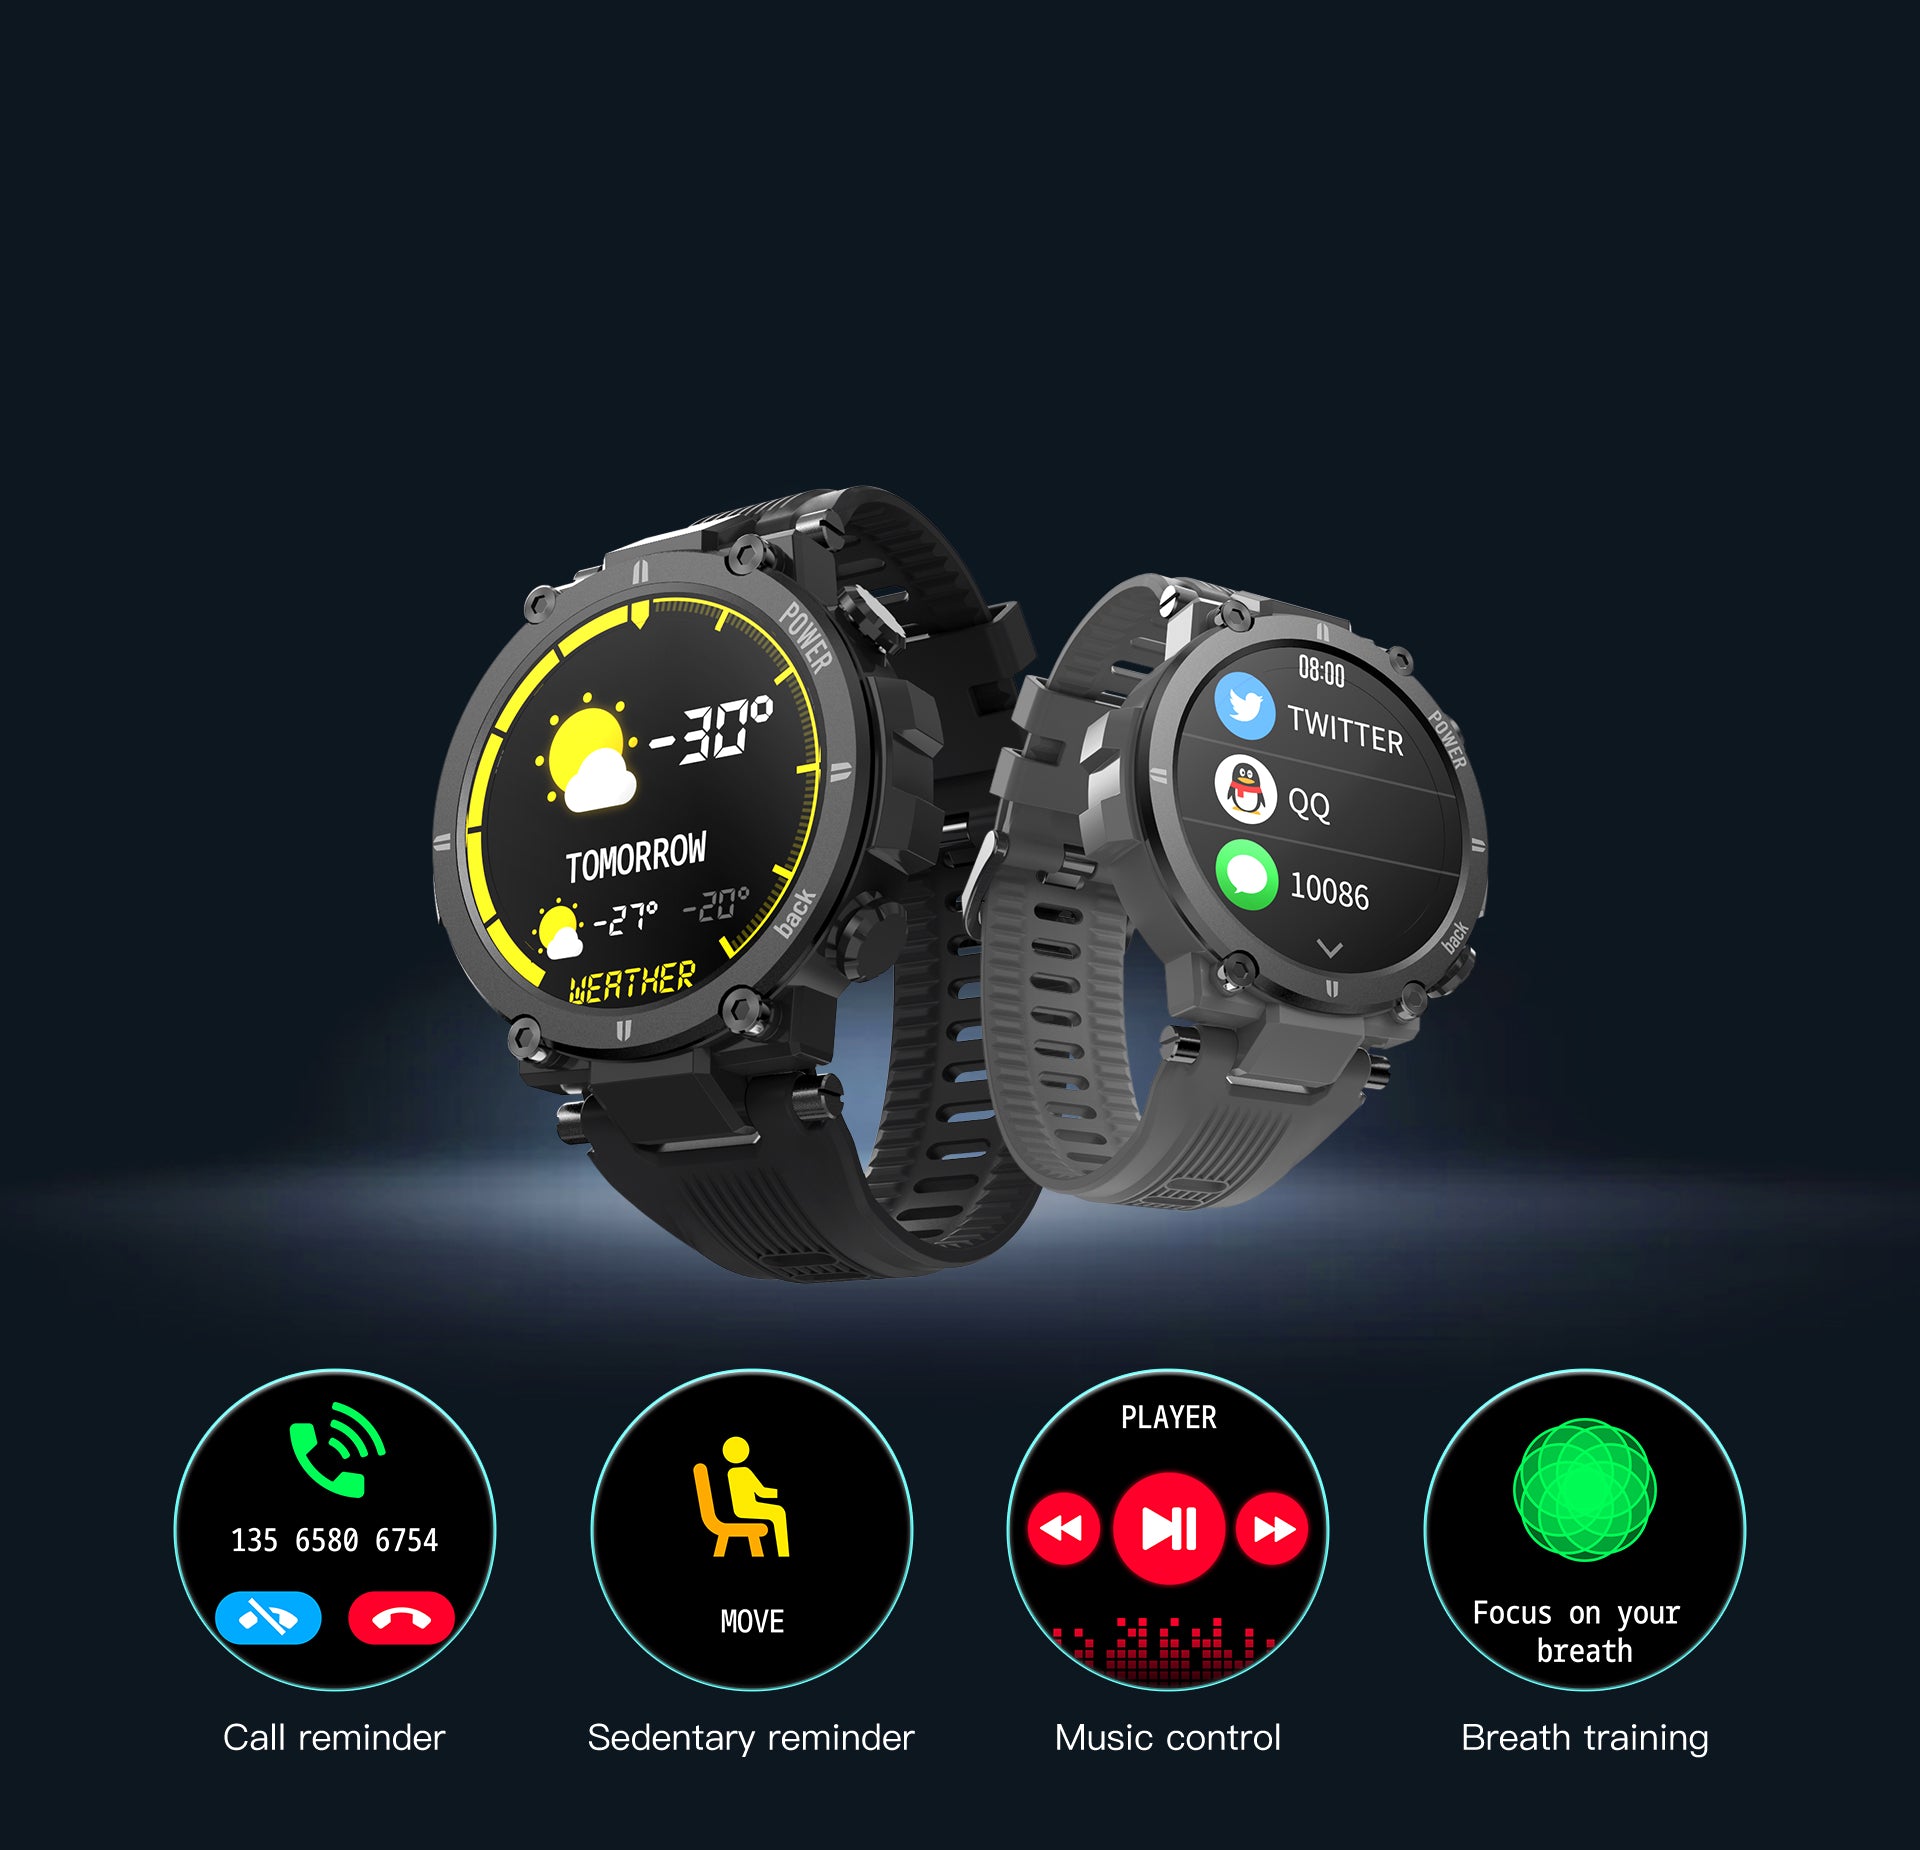 KOSPET Raptor Smartwatch with weather, notice, sedentary reminder and other utilties, all available over your wrist.